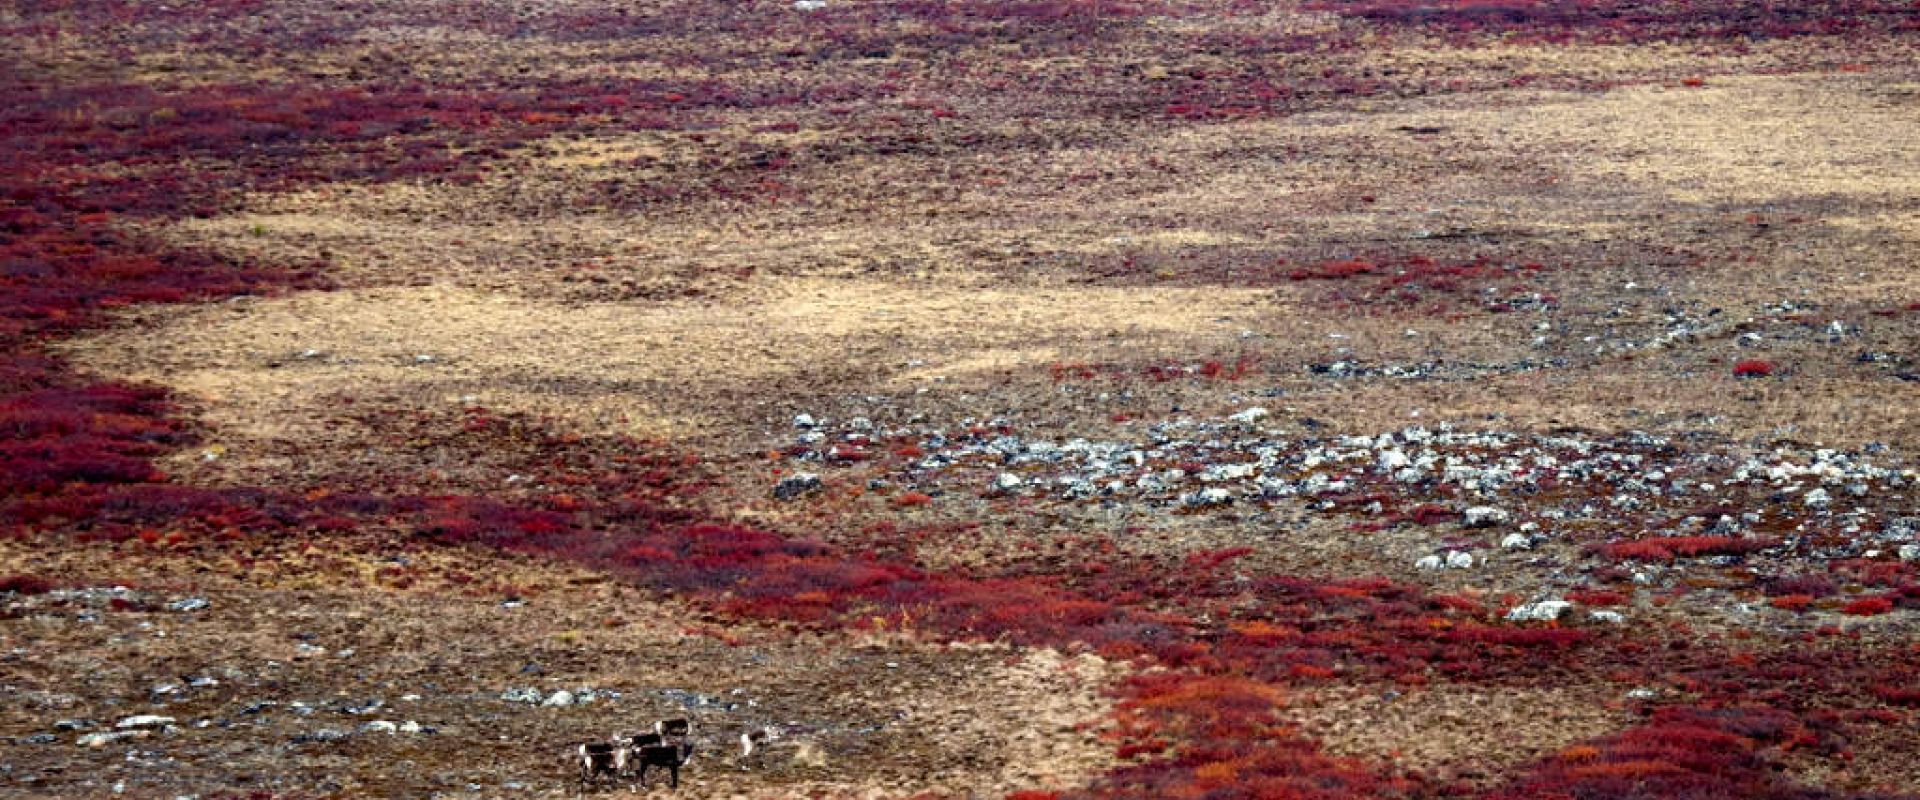 A group of six caribou appear miniscule on the rocky, mossy tundra that surrounds them nearby the Kazan River.